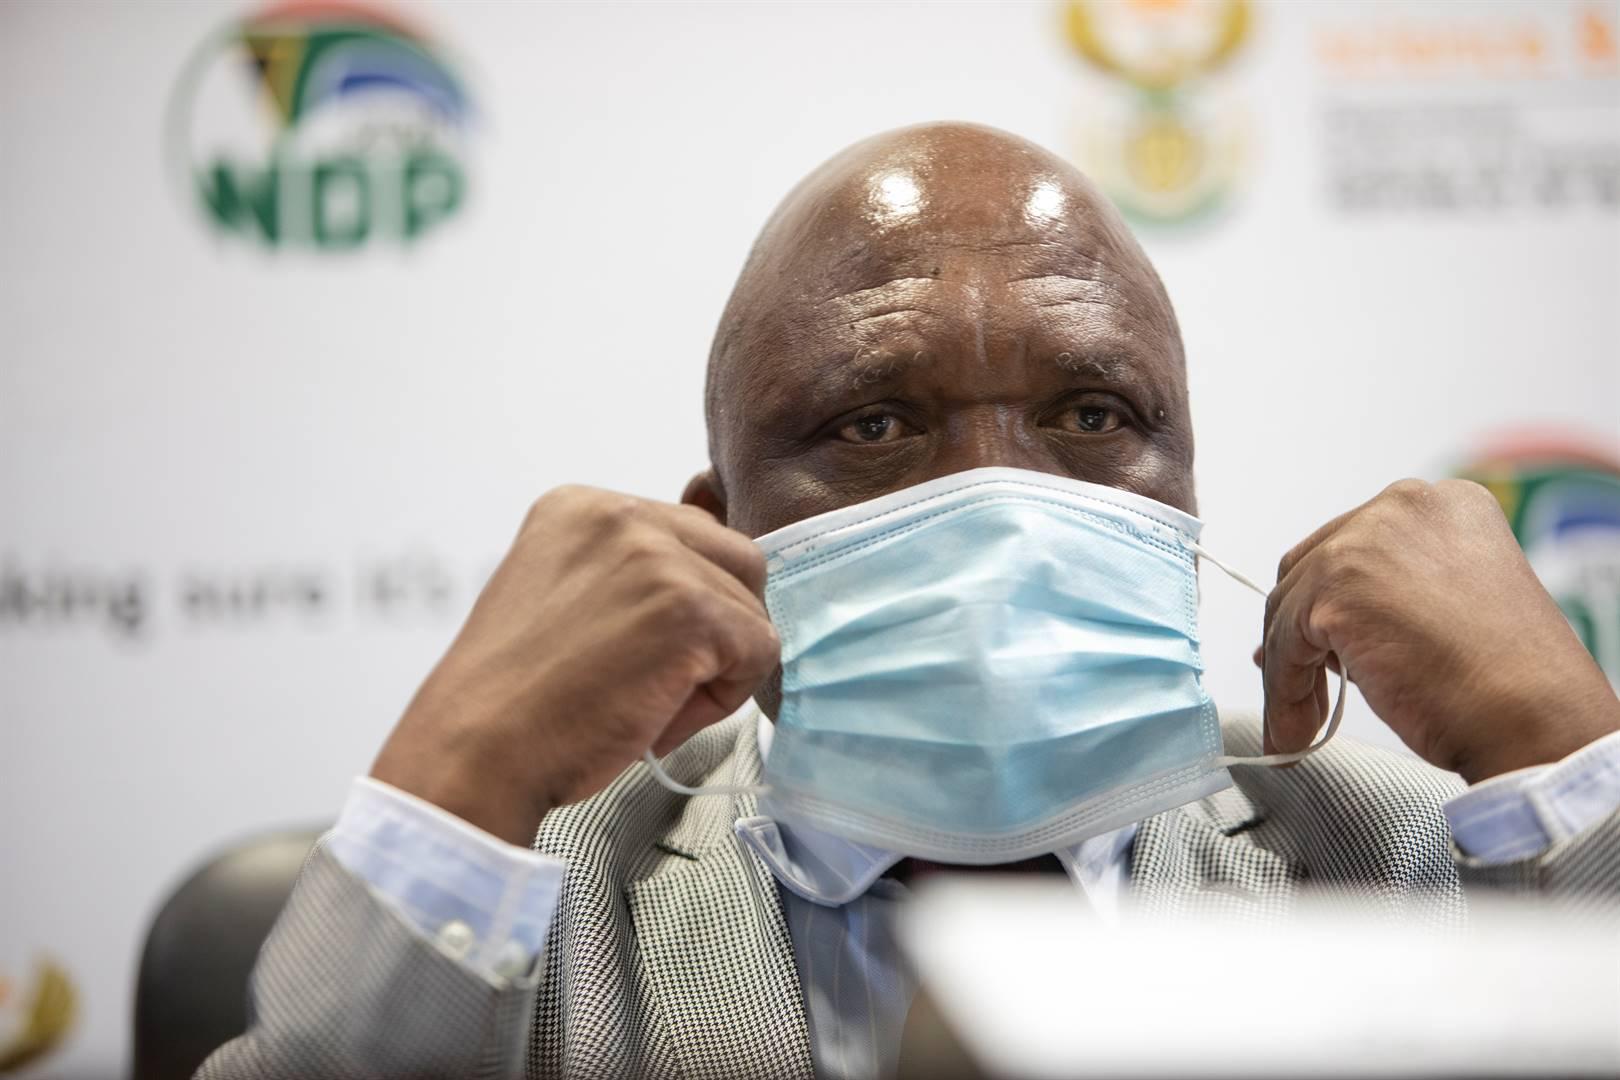 Covid-19 regulations: Health minister to 'unpack' implications of repealing mask mandate